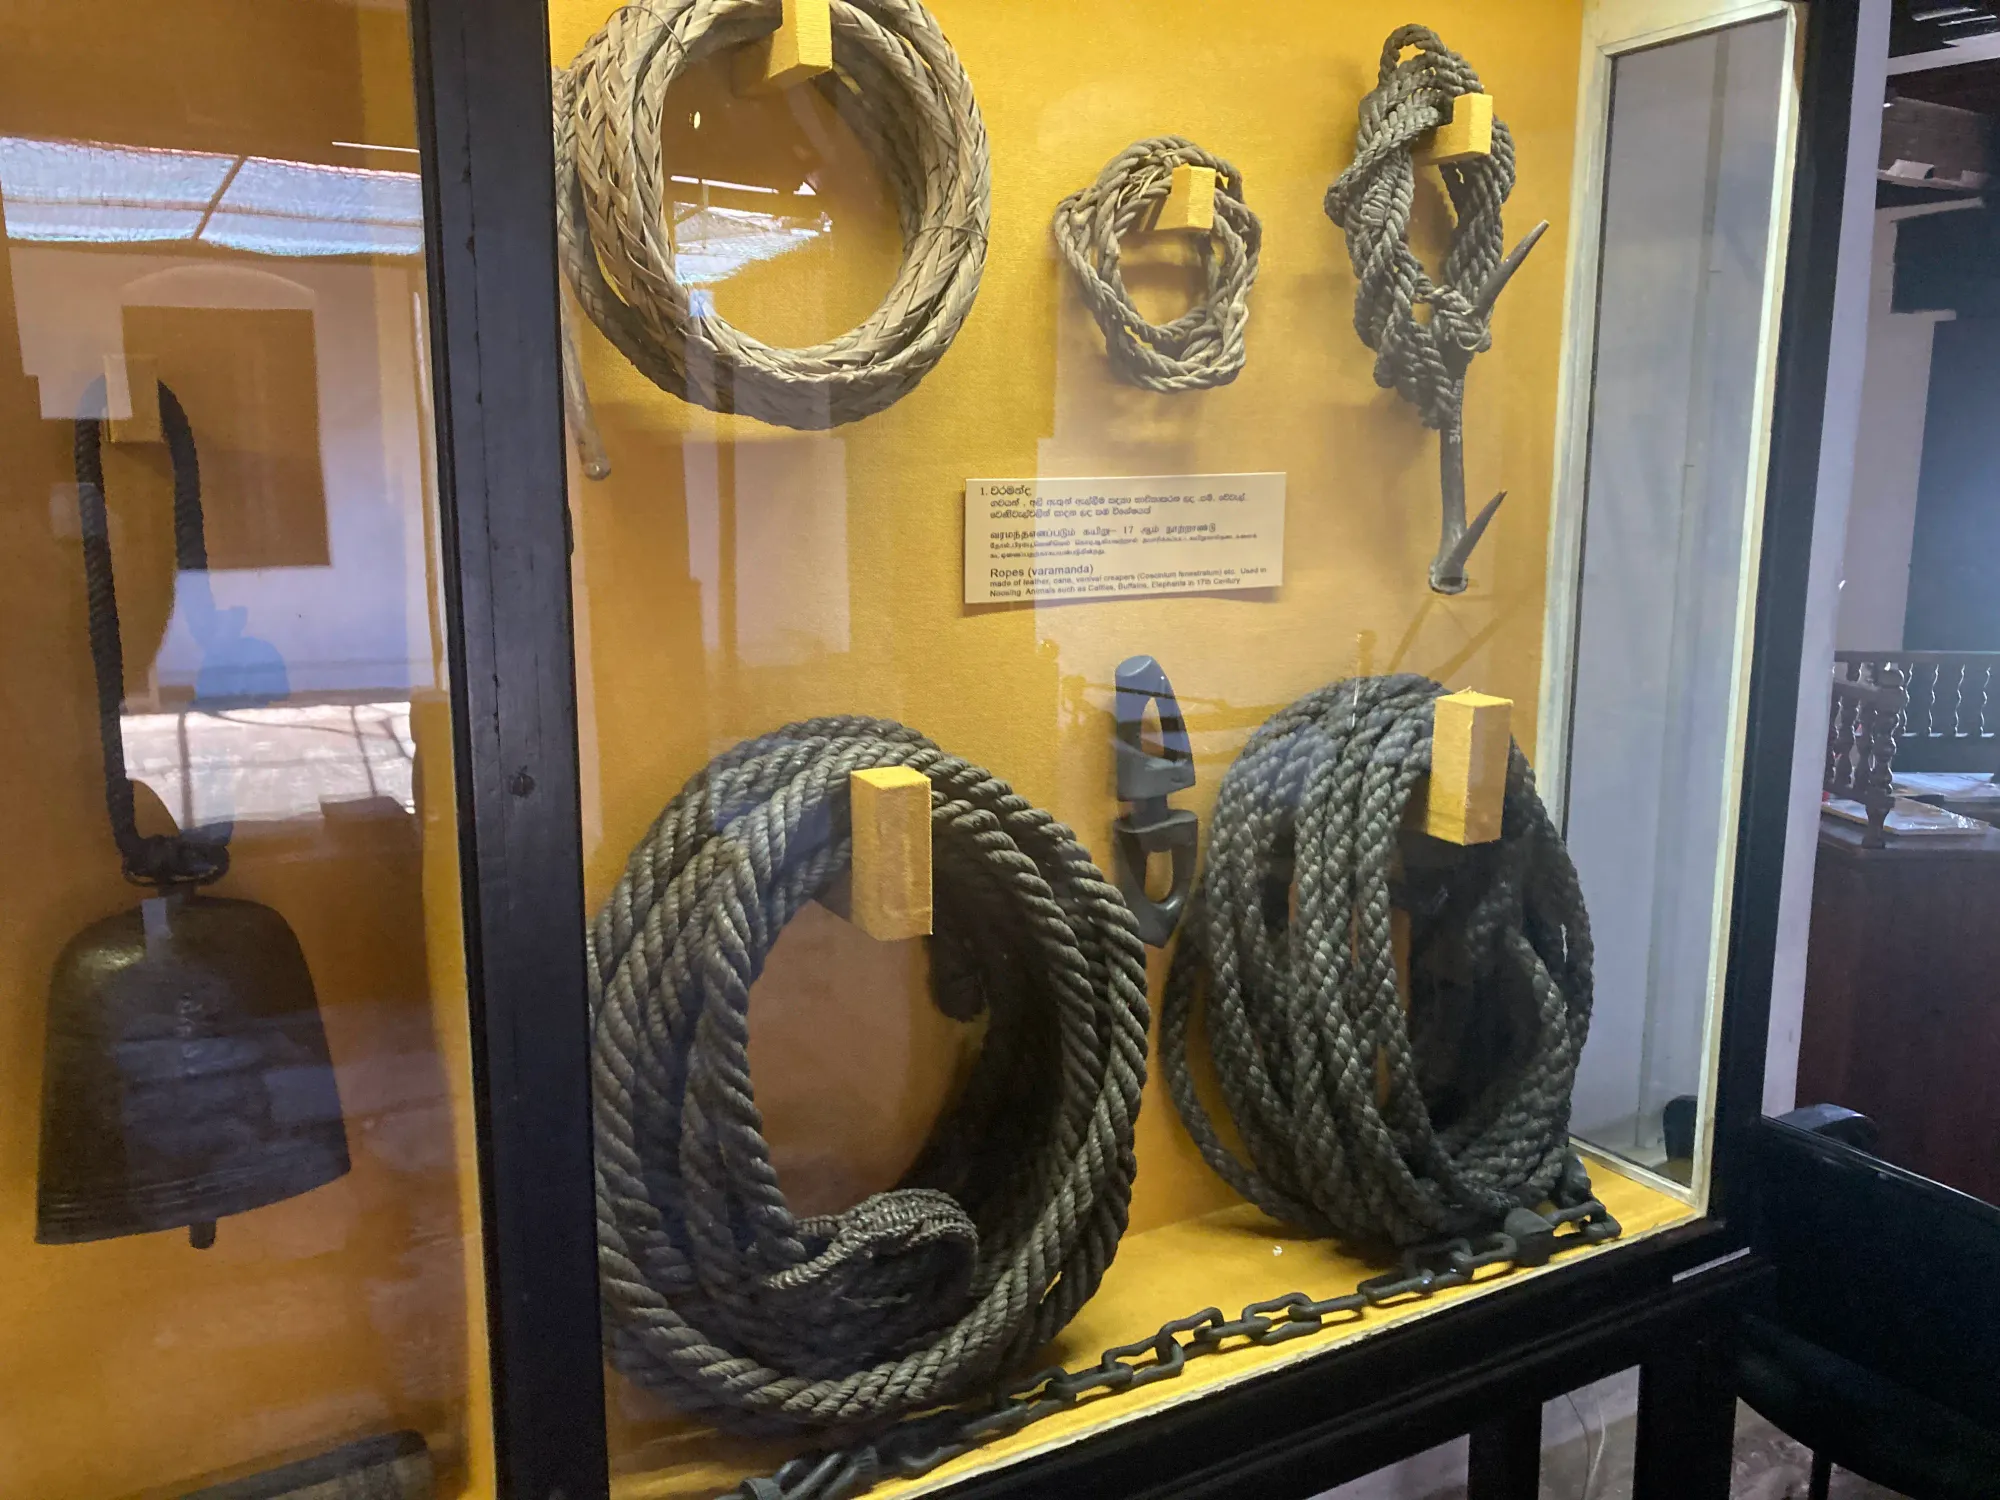 Ropes used for noosing elephants and cattle, at the Kandy National Museum, Sri Lanka